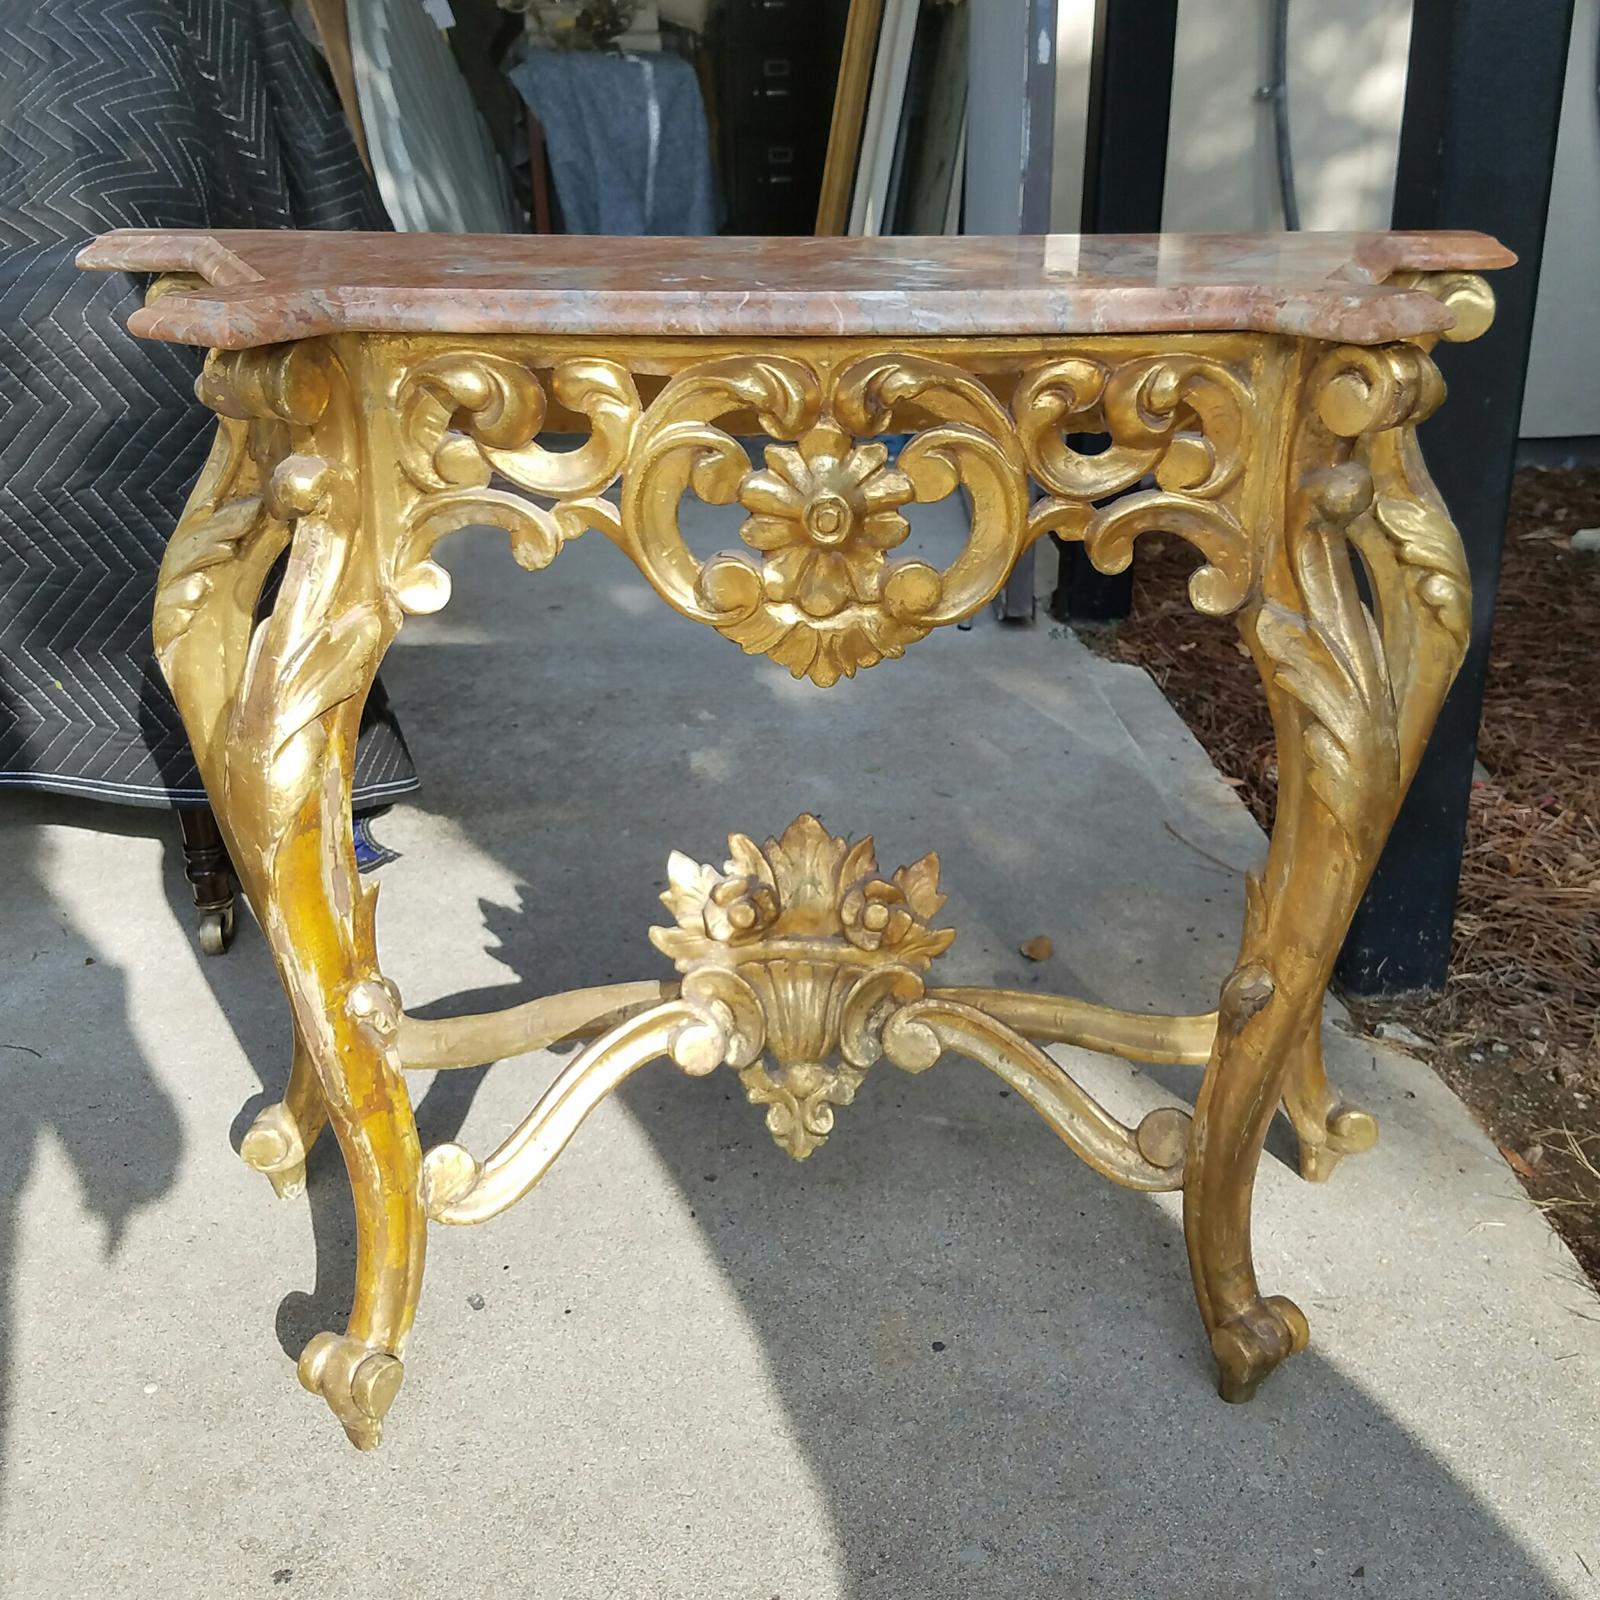 19th-20th century French carved giltwood console with marble top.